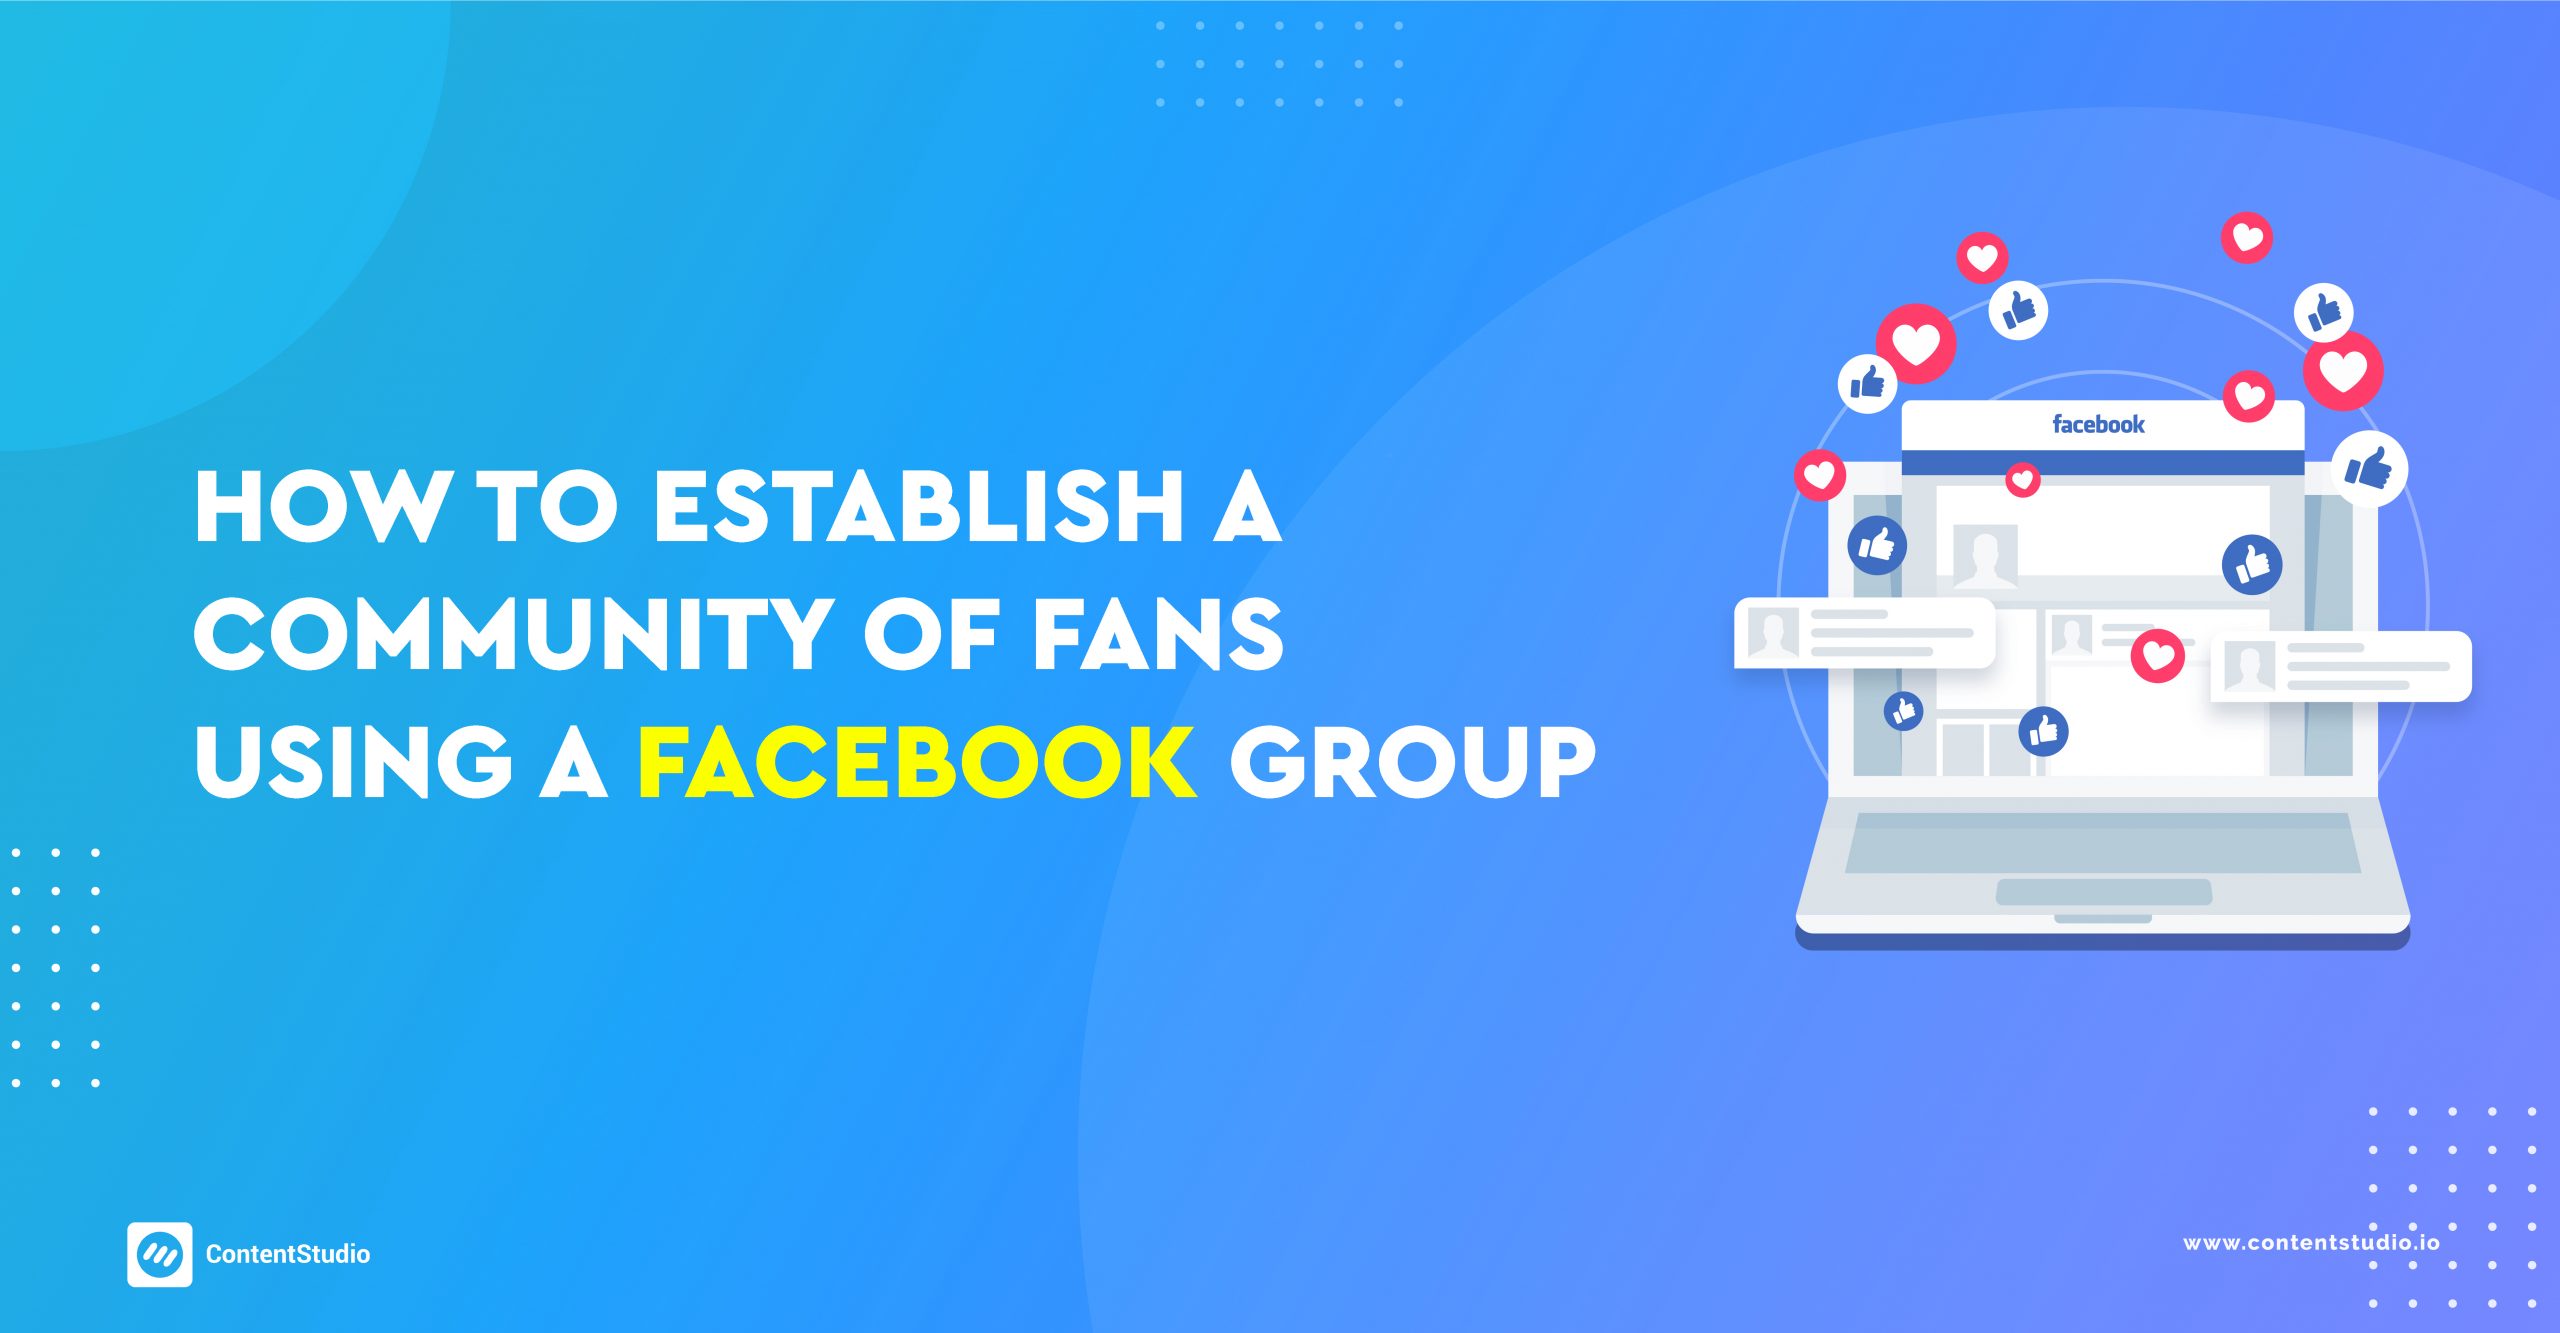 How to Establish a Community of Fans Using a Facebook Group